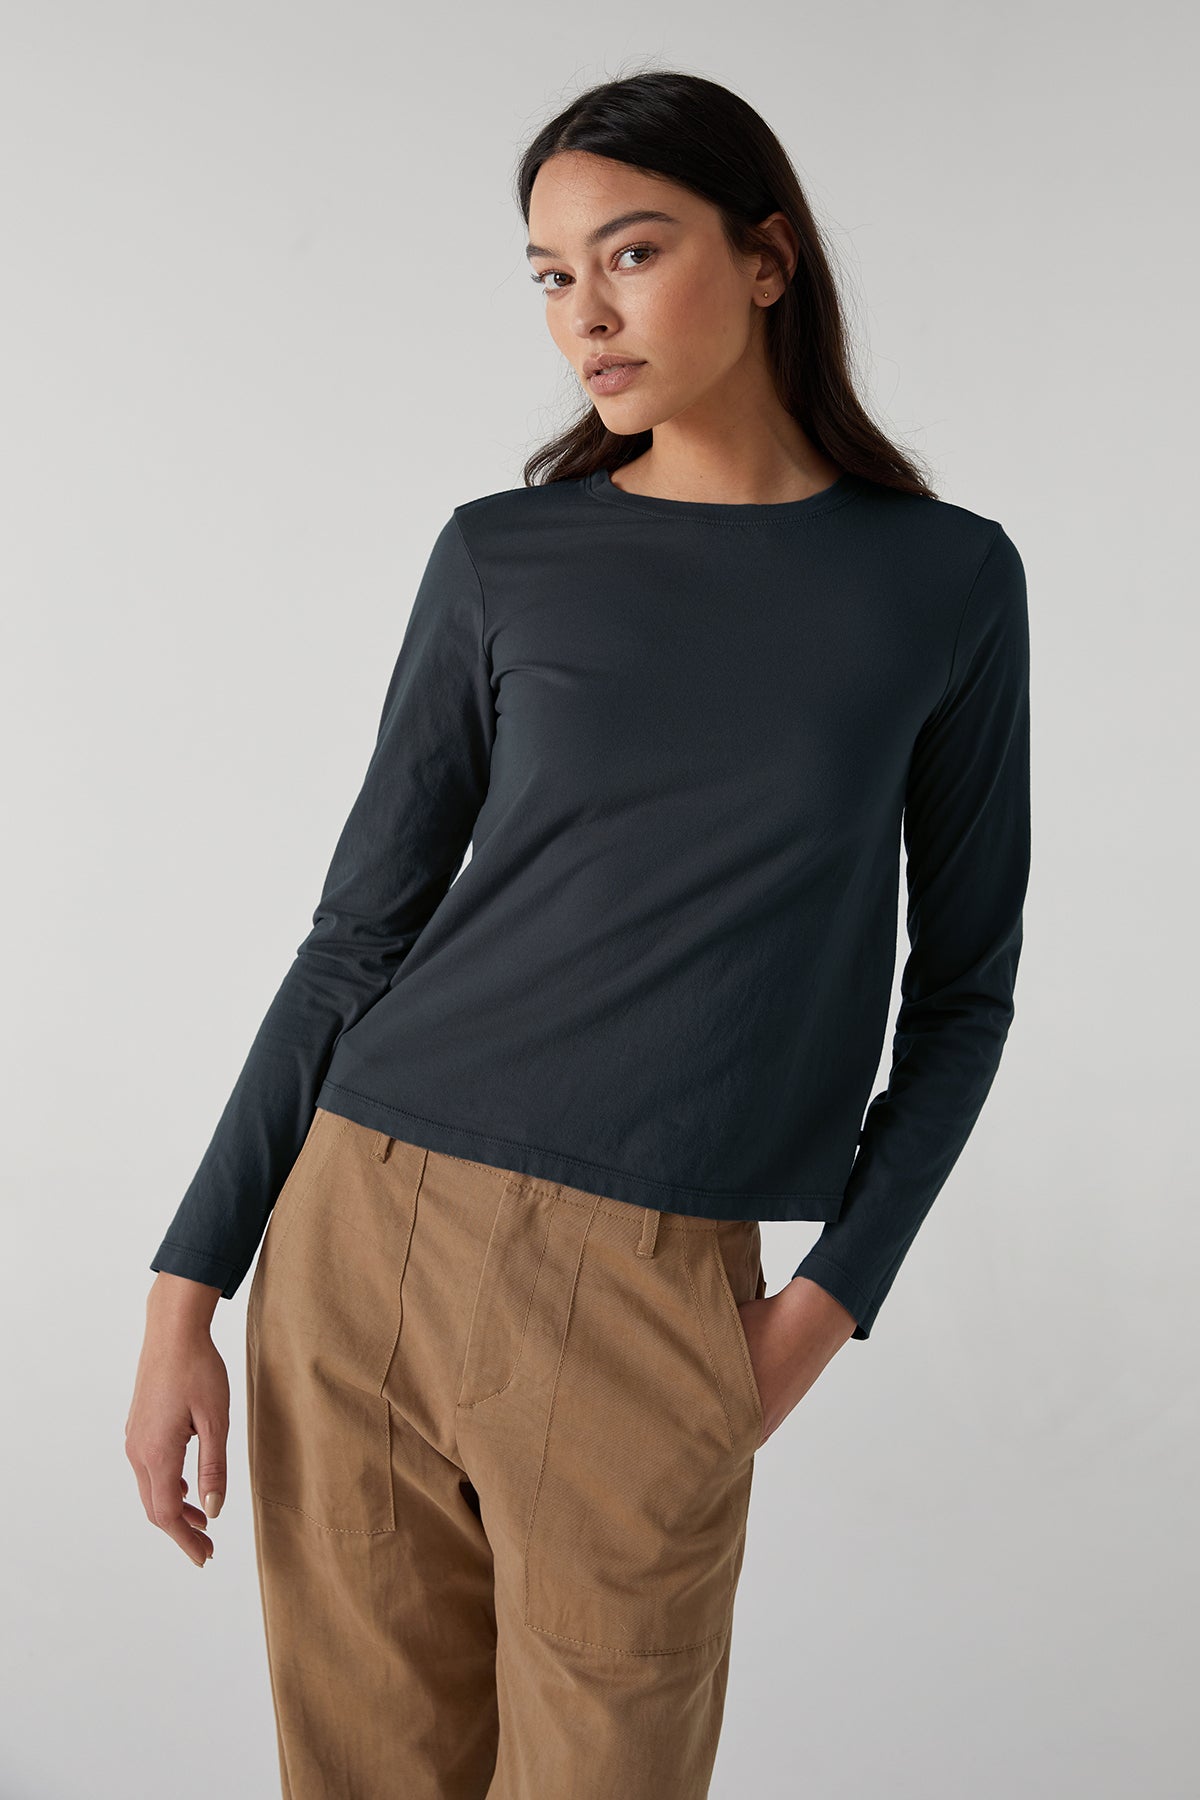 Velvet by Jenny Graham's VICENTE TEE, a long sleeve cotton tee.-24427644059841